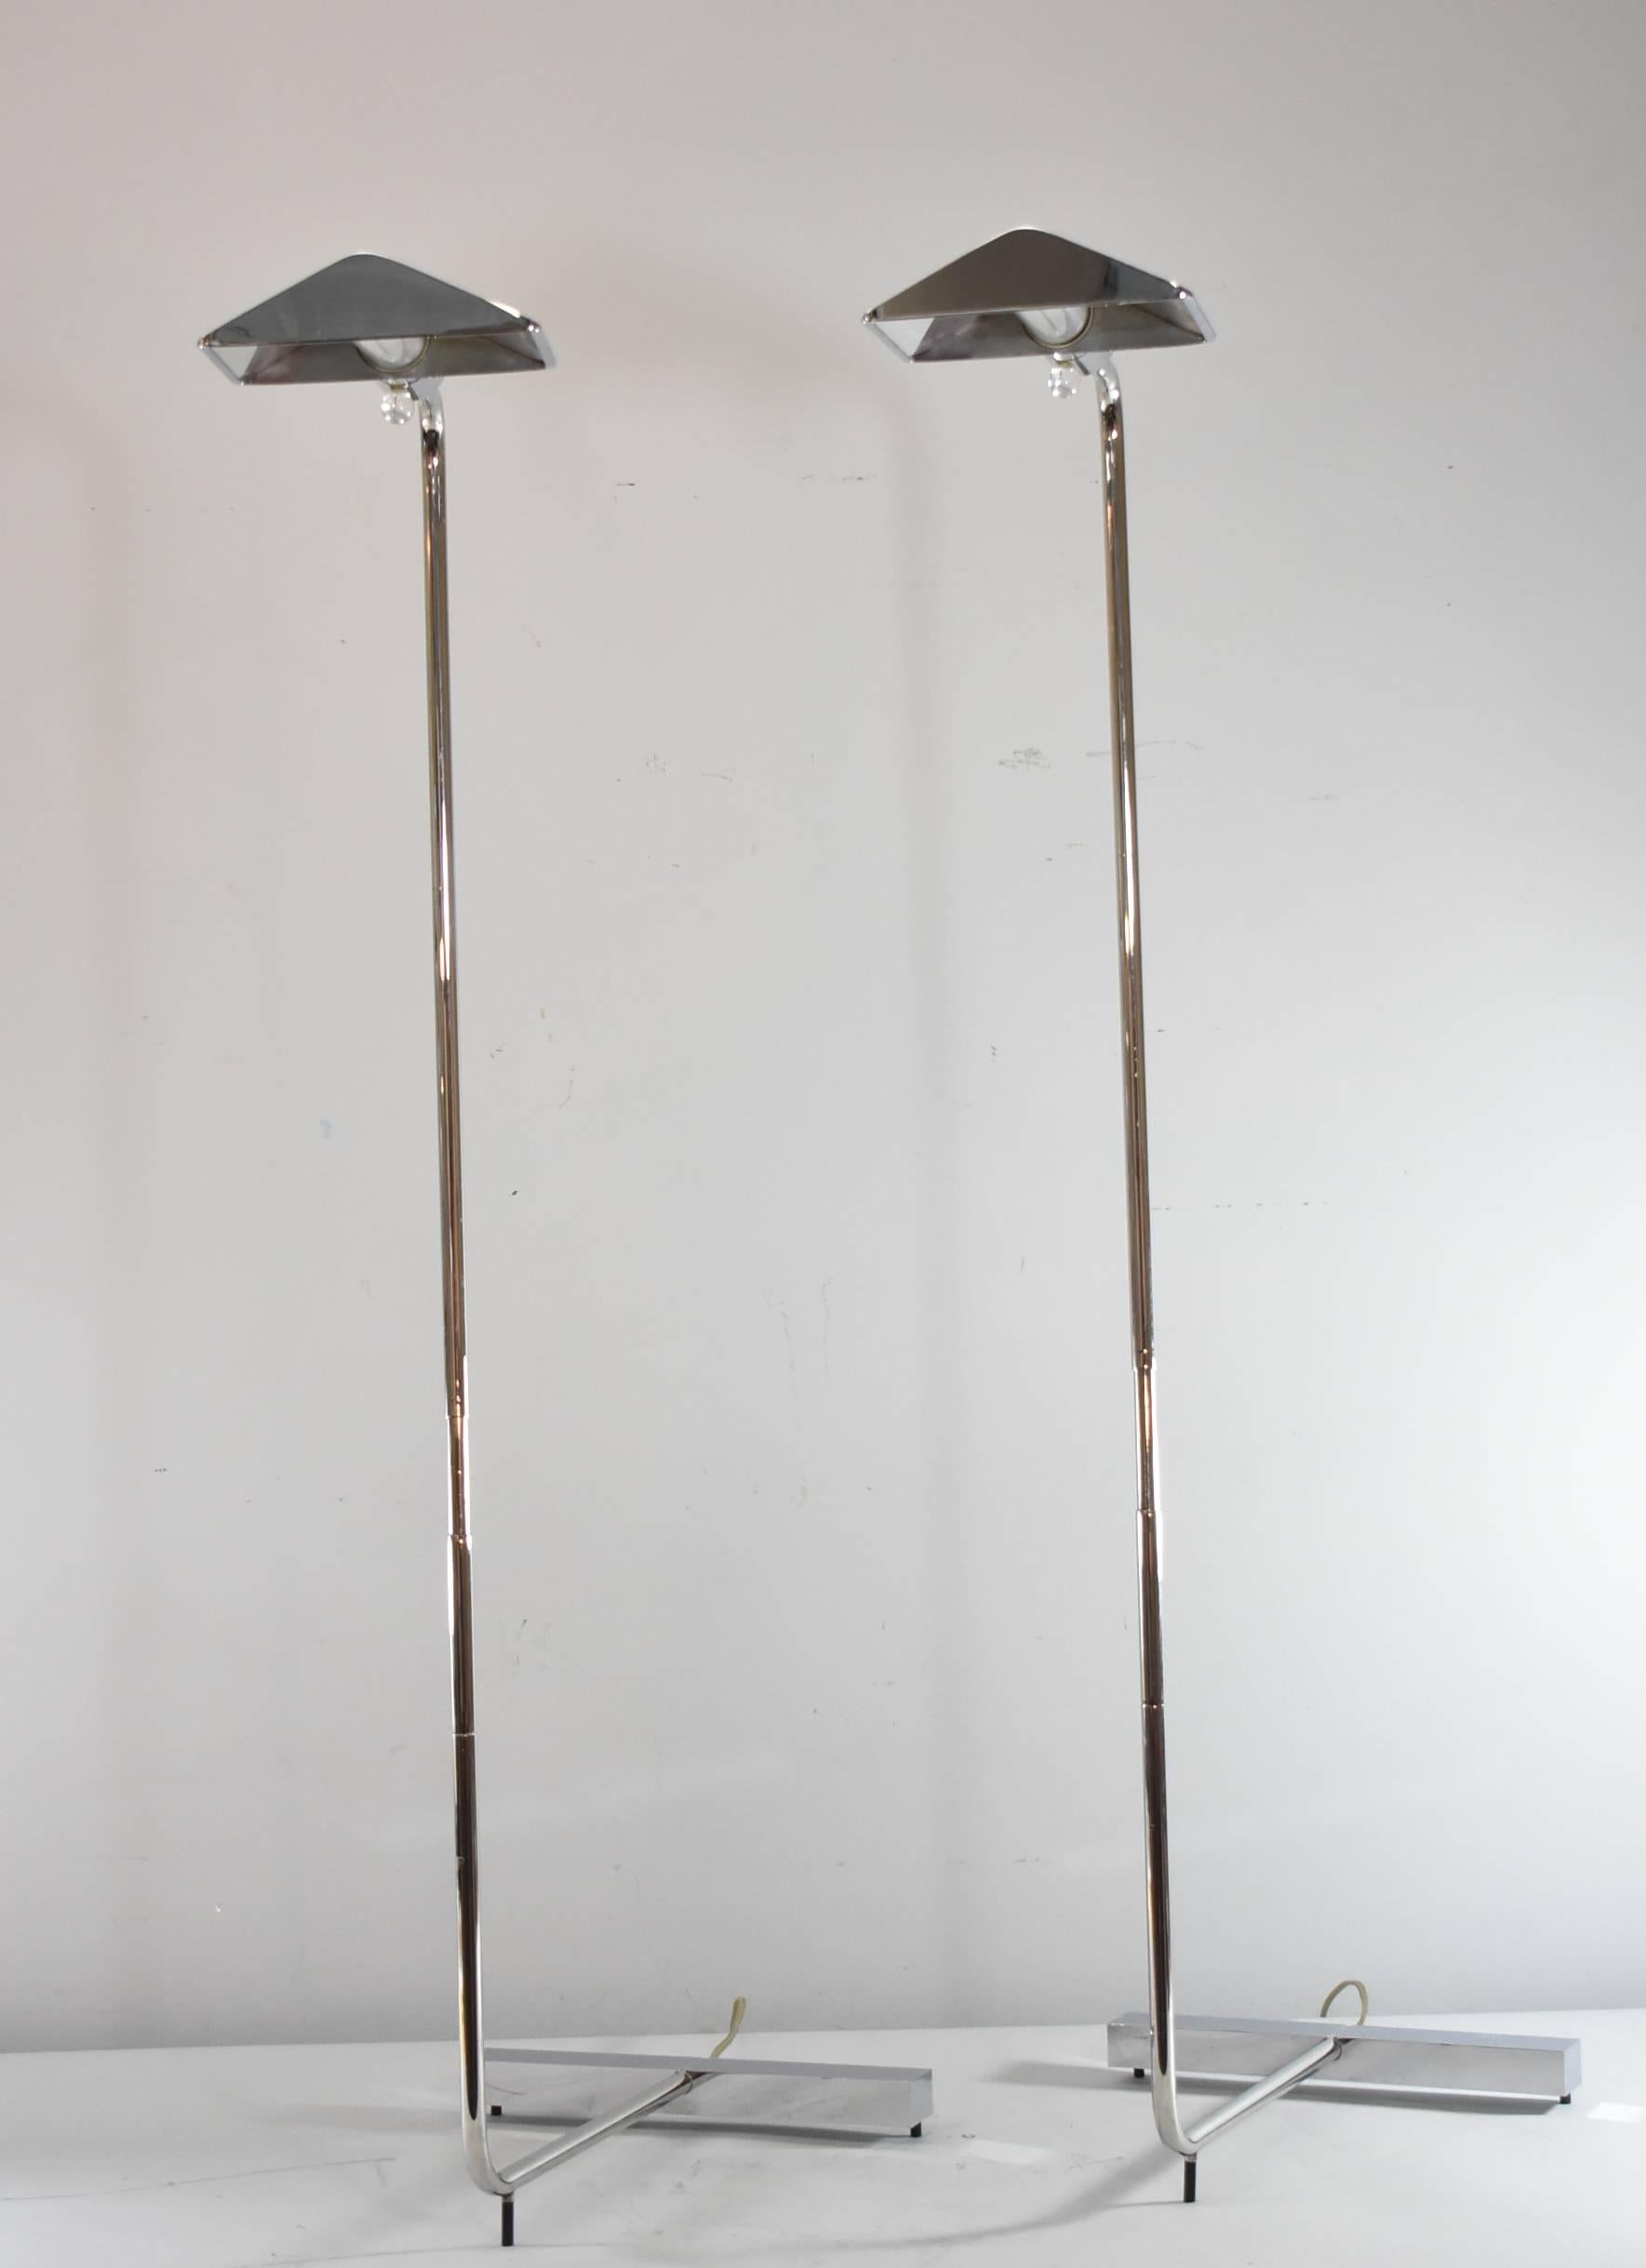 Mid-Century Modern chrome single socket signed floor lamps by Cedric Hartman. Shade swivels and the height is adjustable from 37